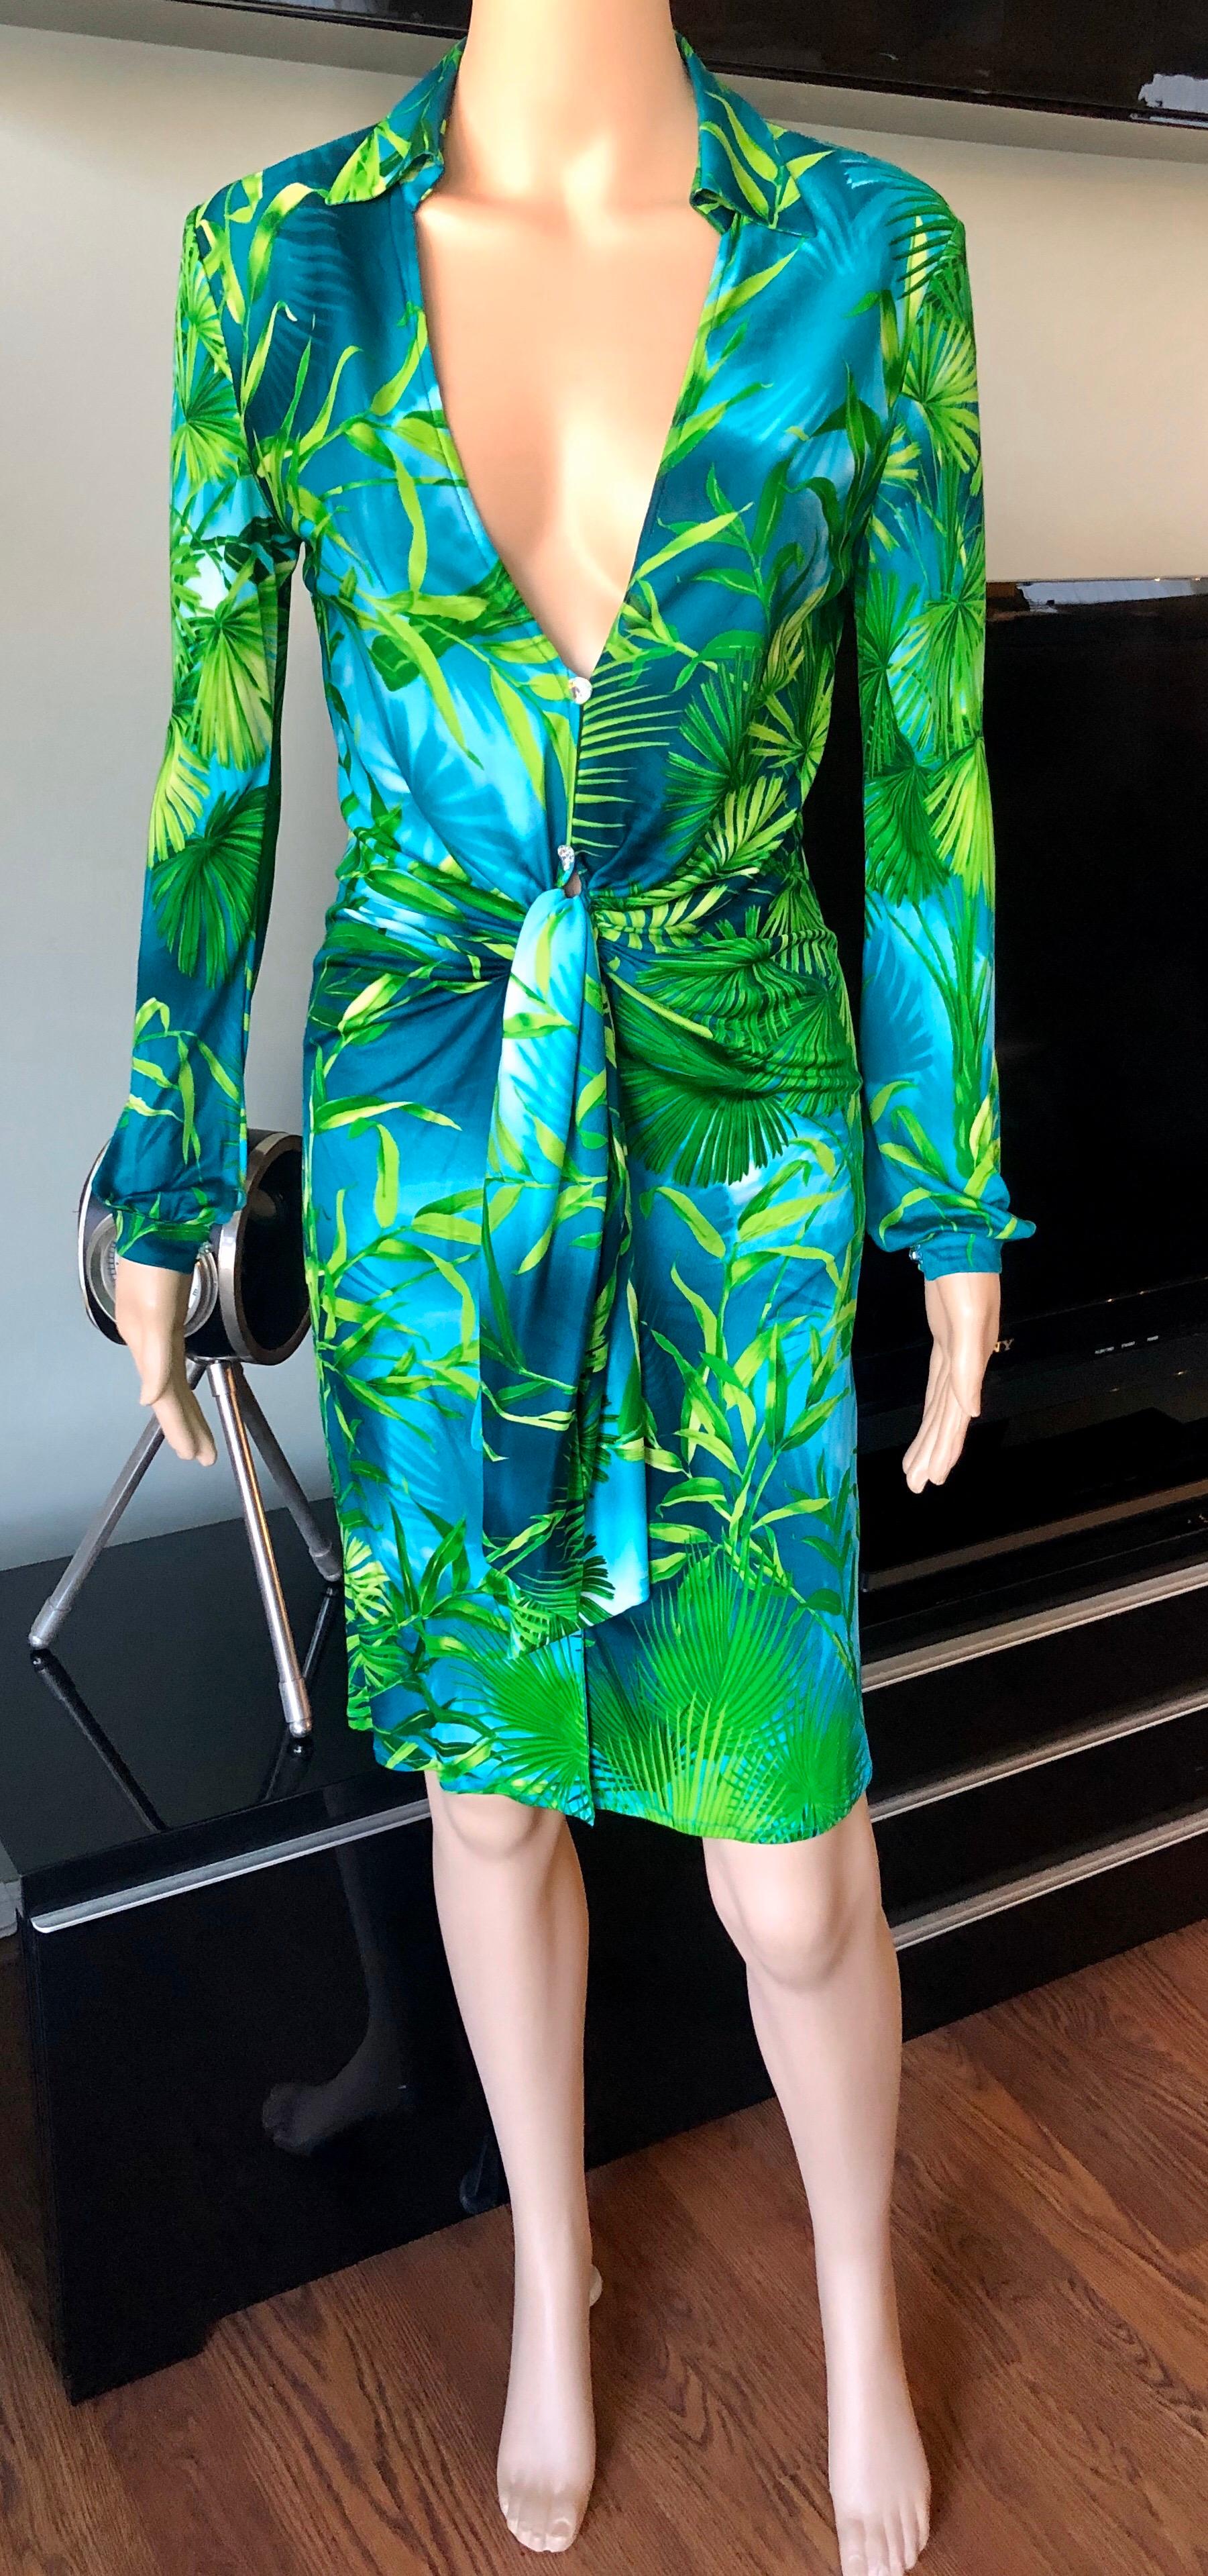 Gianni Versace Runway S/S 2000 Vintage Tropical Print Plunging Neckline Dress IT 40

Look 1 from the Spring 2000 Collection. Green tropical palm print silk low cut dress from Gianni Versace Vintage featuring Swarovski crystal buttons, long sleeves,